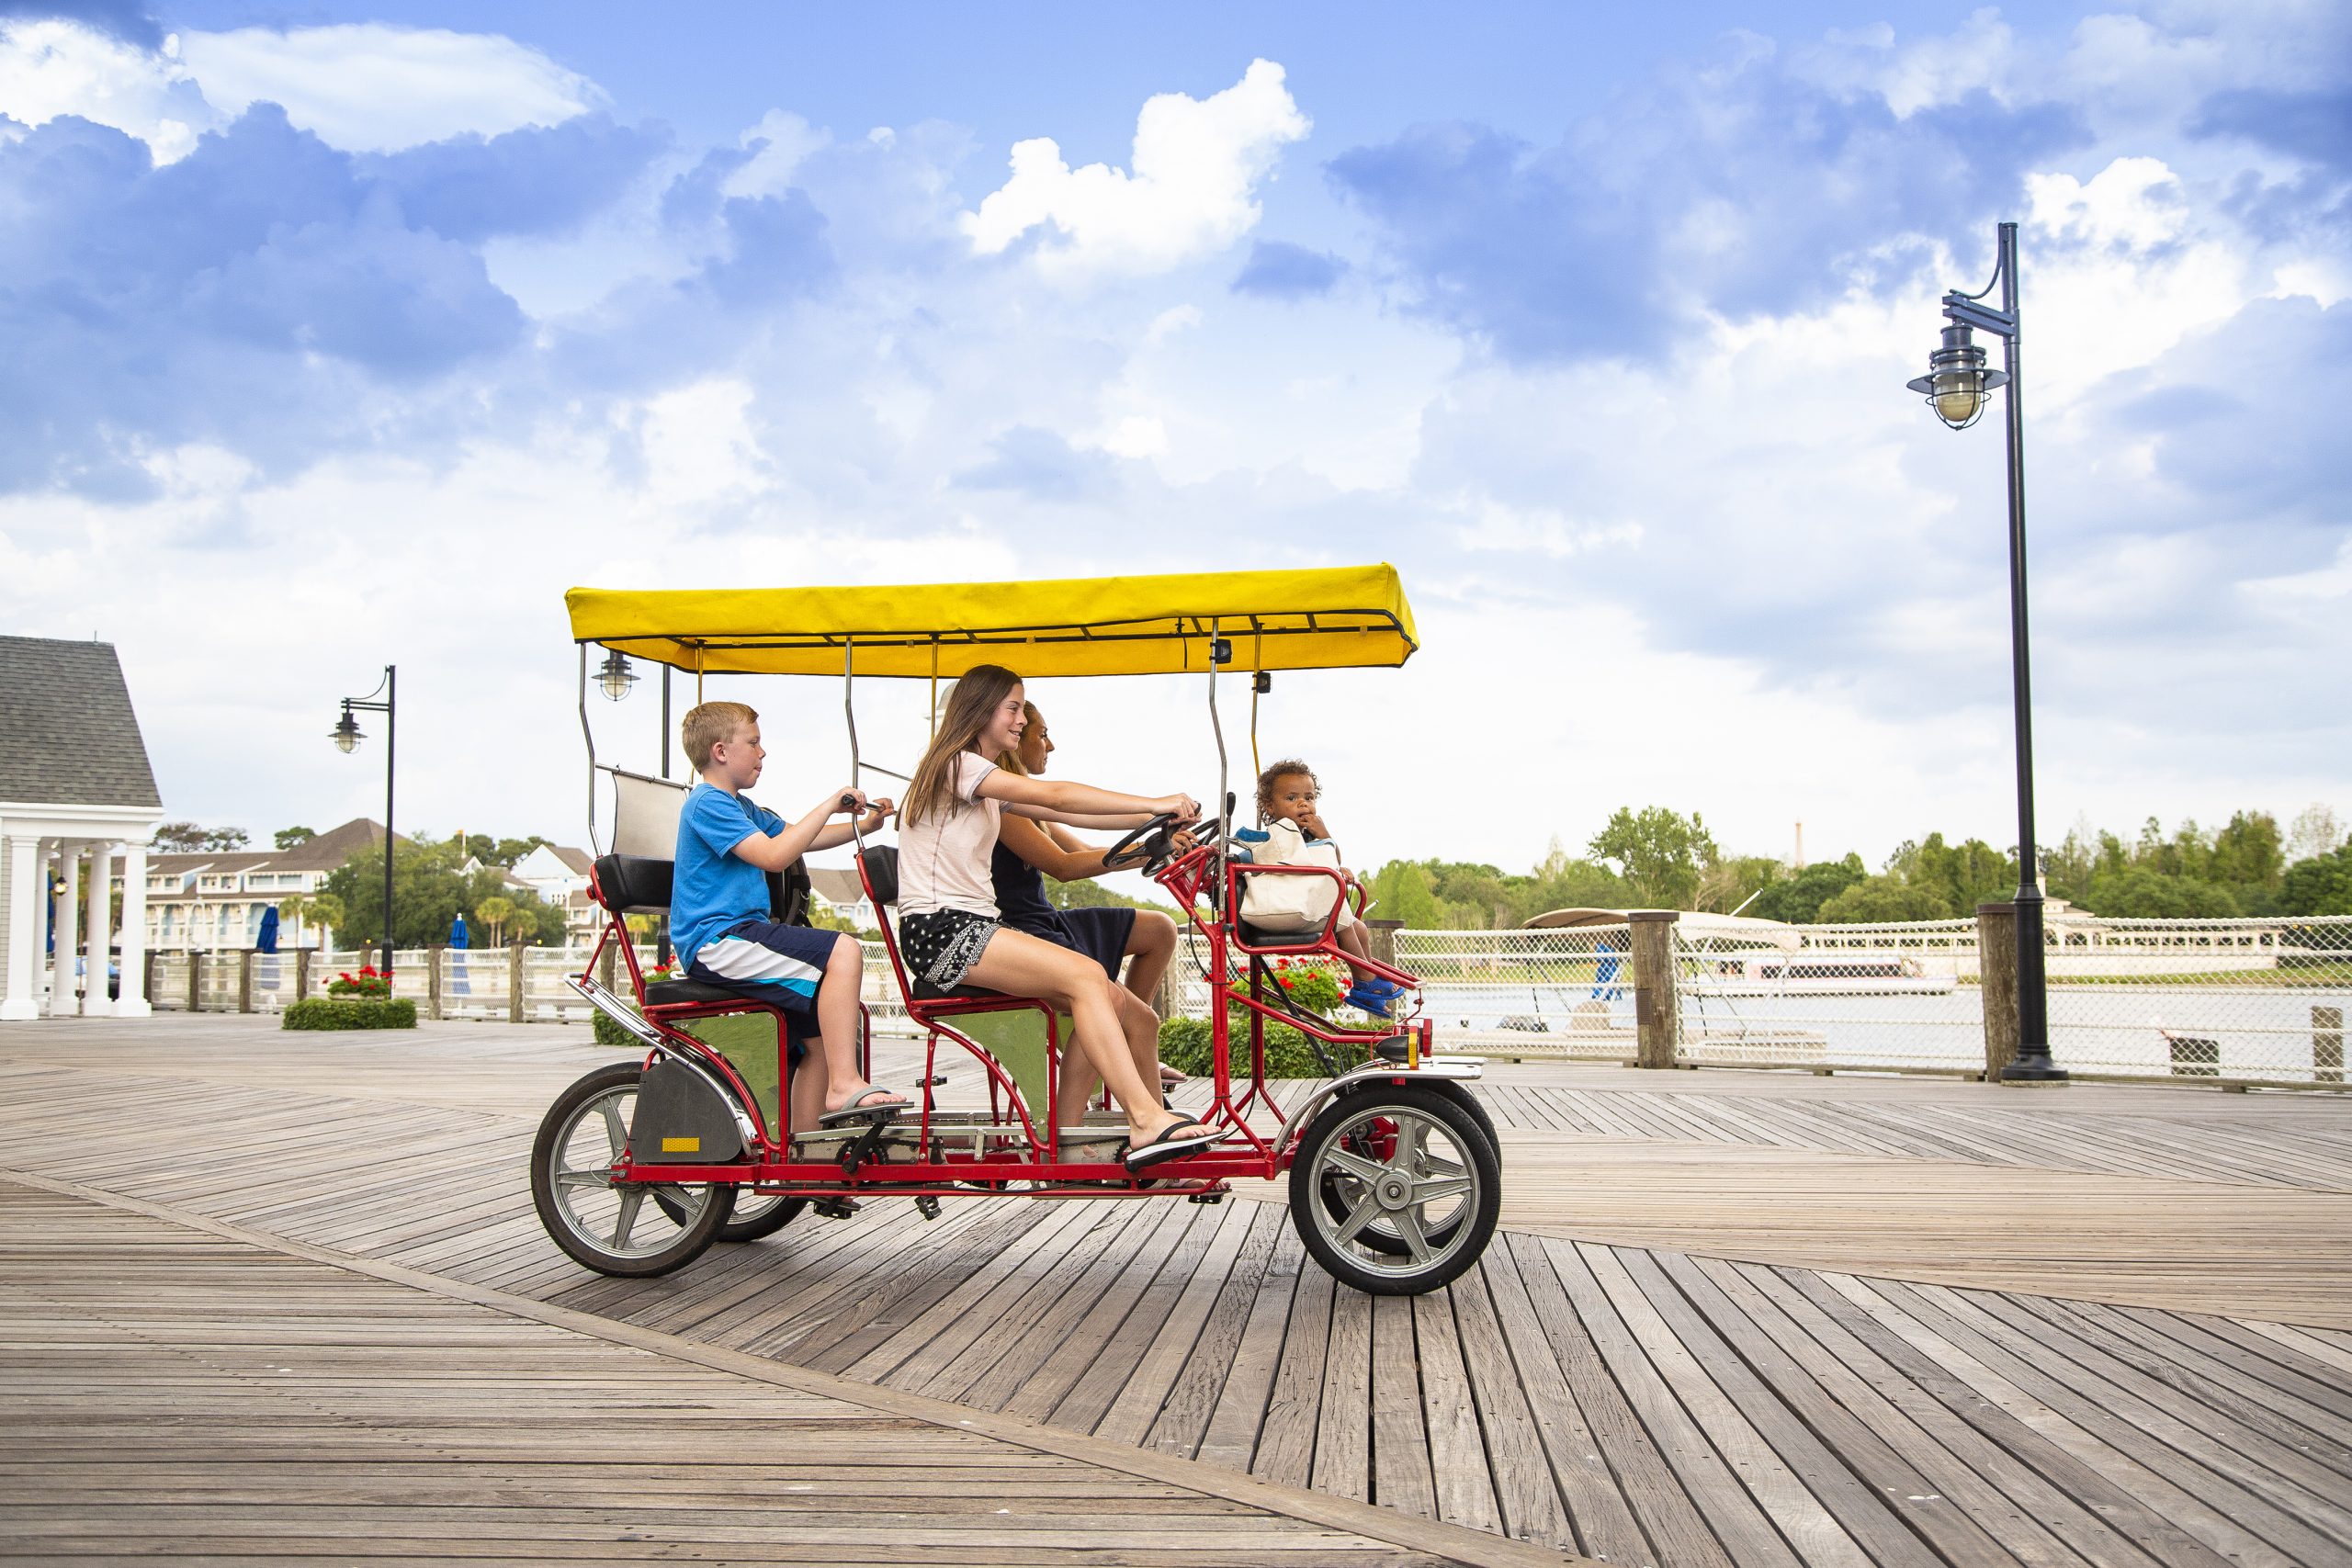 things to do in orlando florida with little kids besides the disney parks